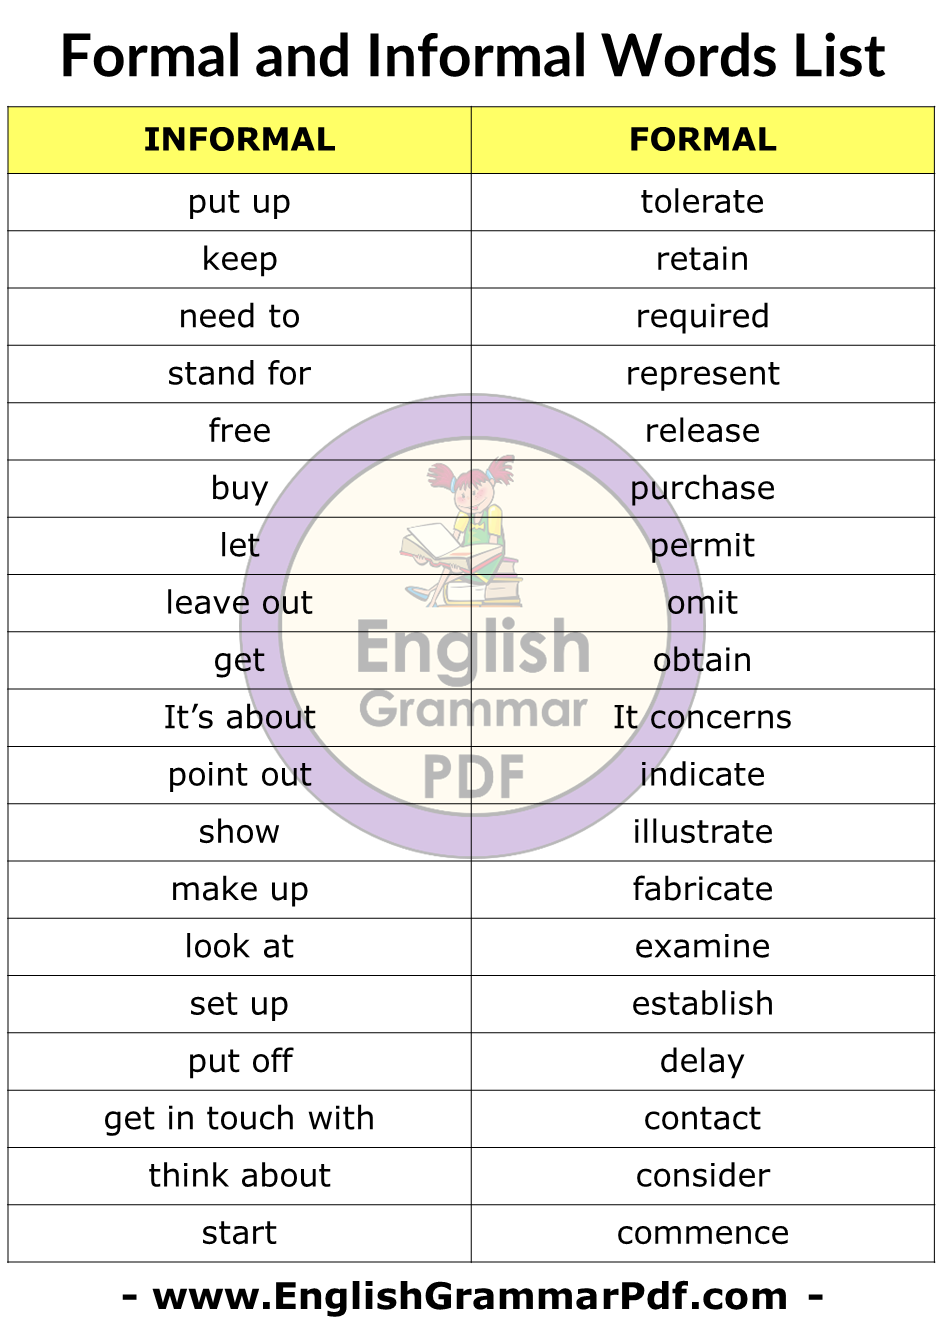 English Informal and Formal Words List